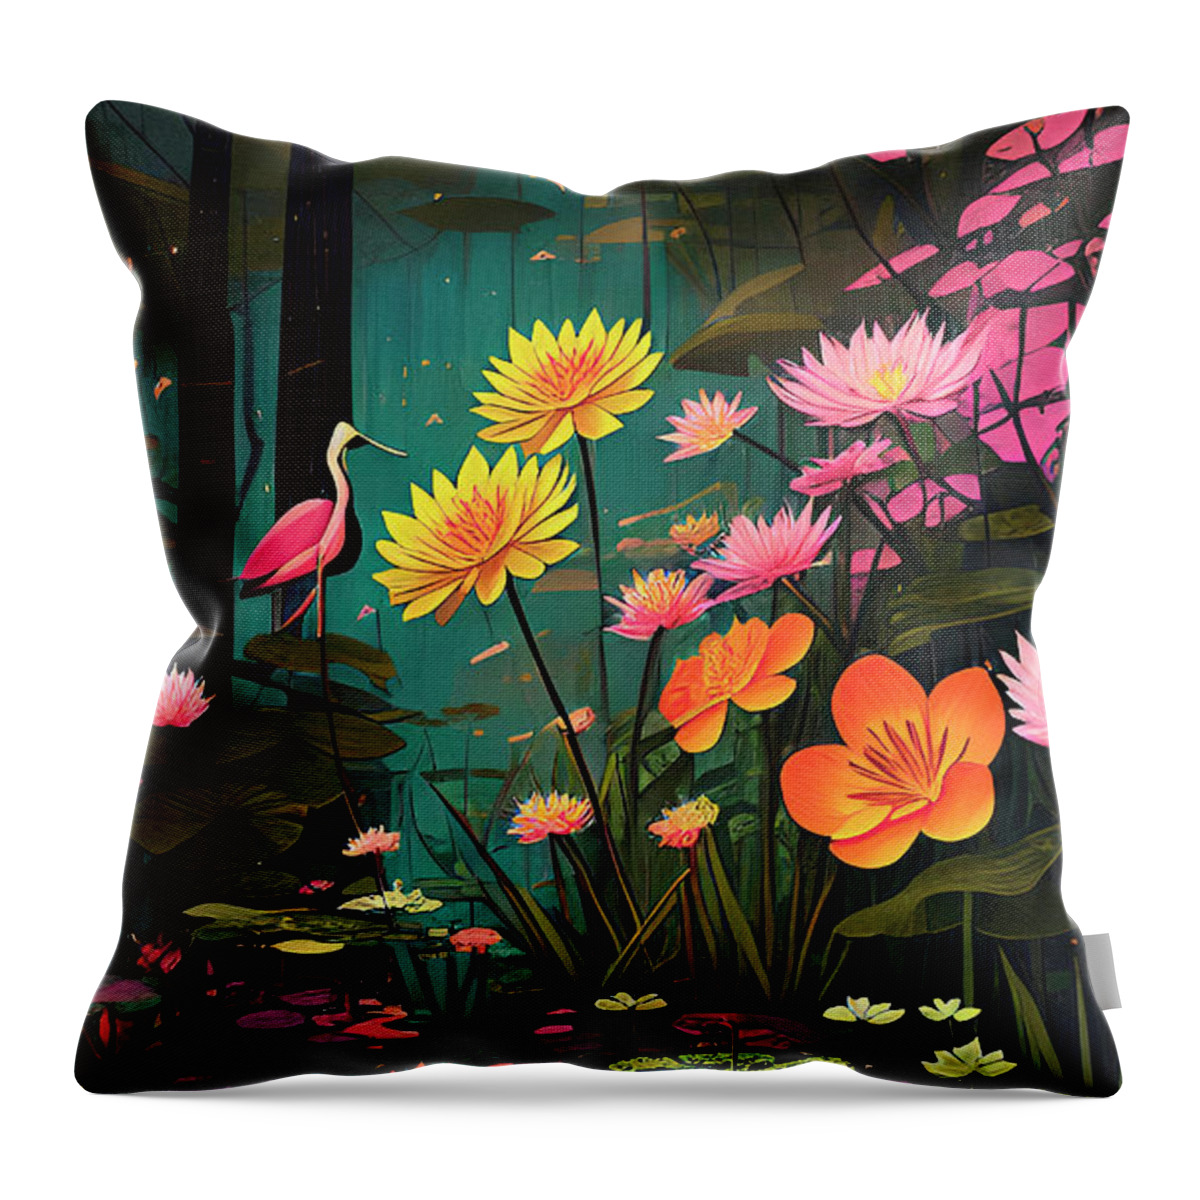 Magical Nature Throw Pillow featuring the digital art Swamp Magic Flowers Birds Black Water Lily Pads by Ginette Callaway